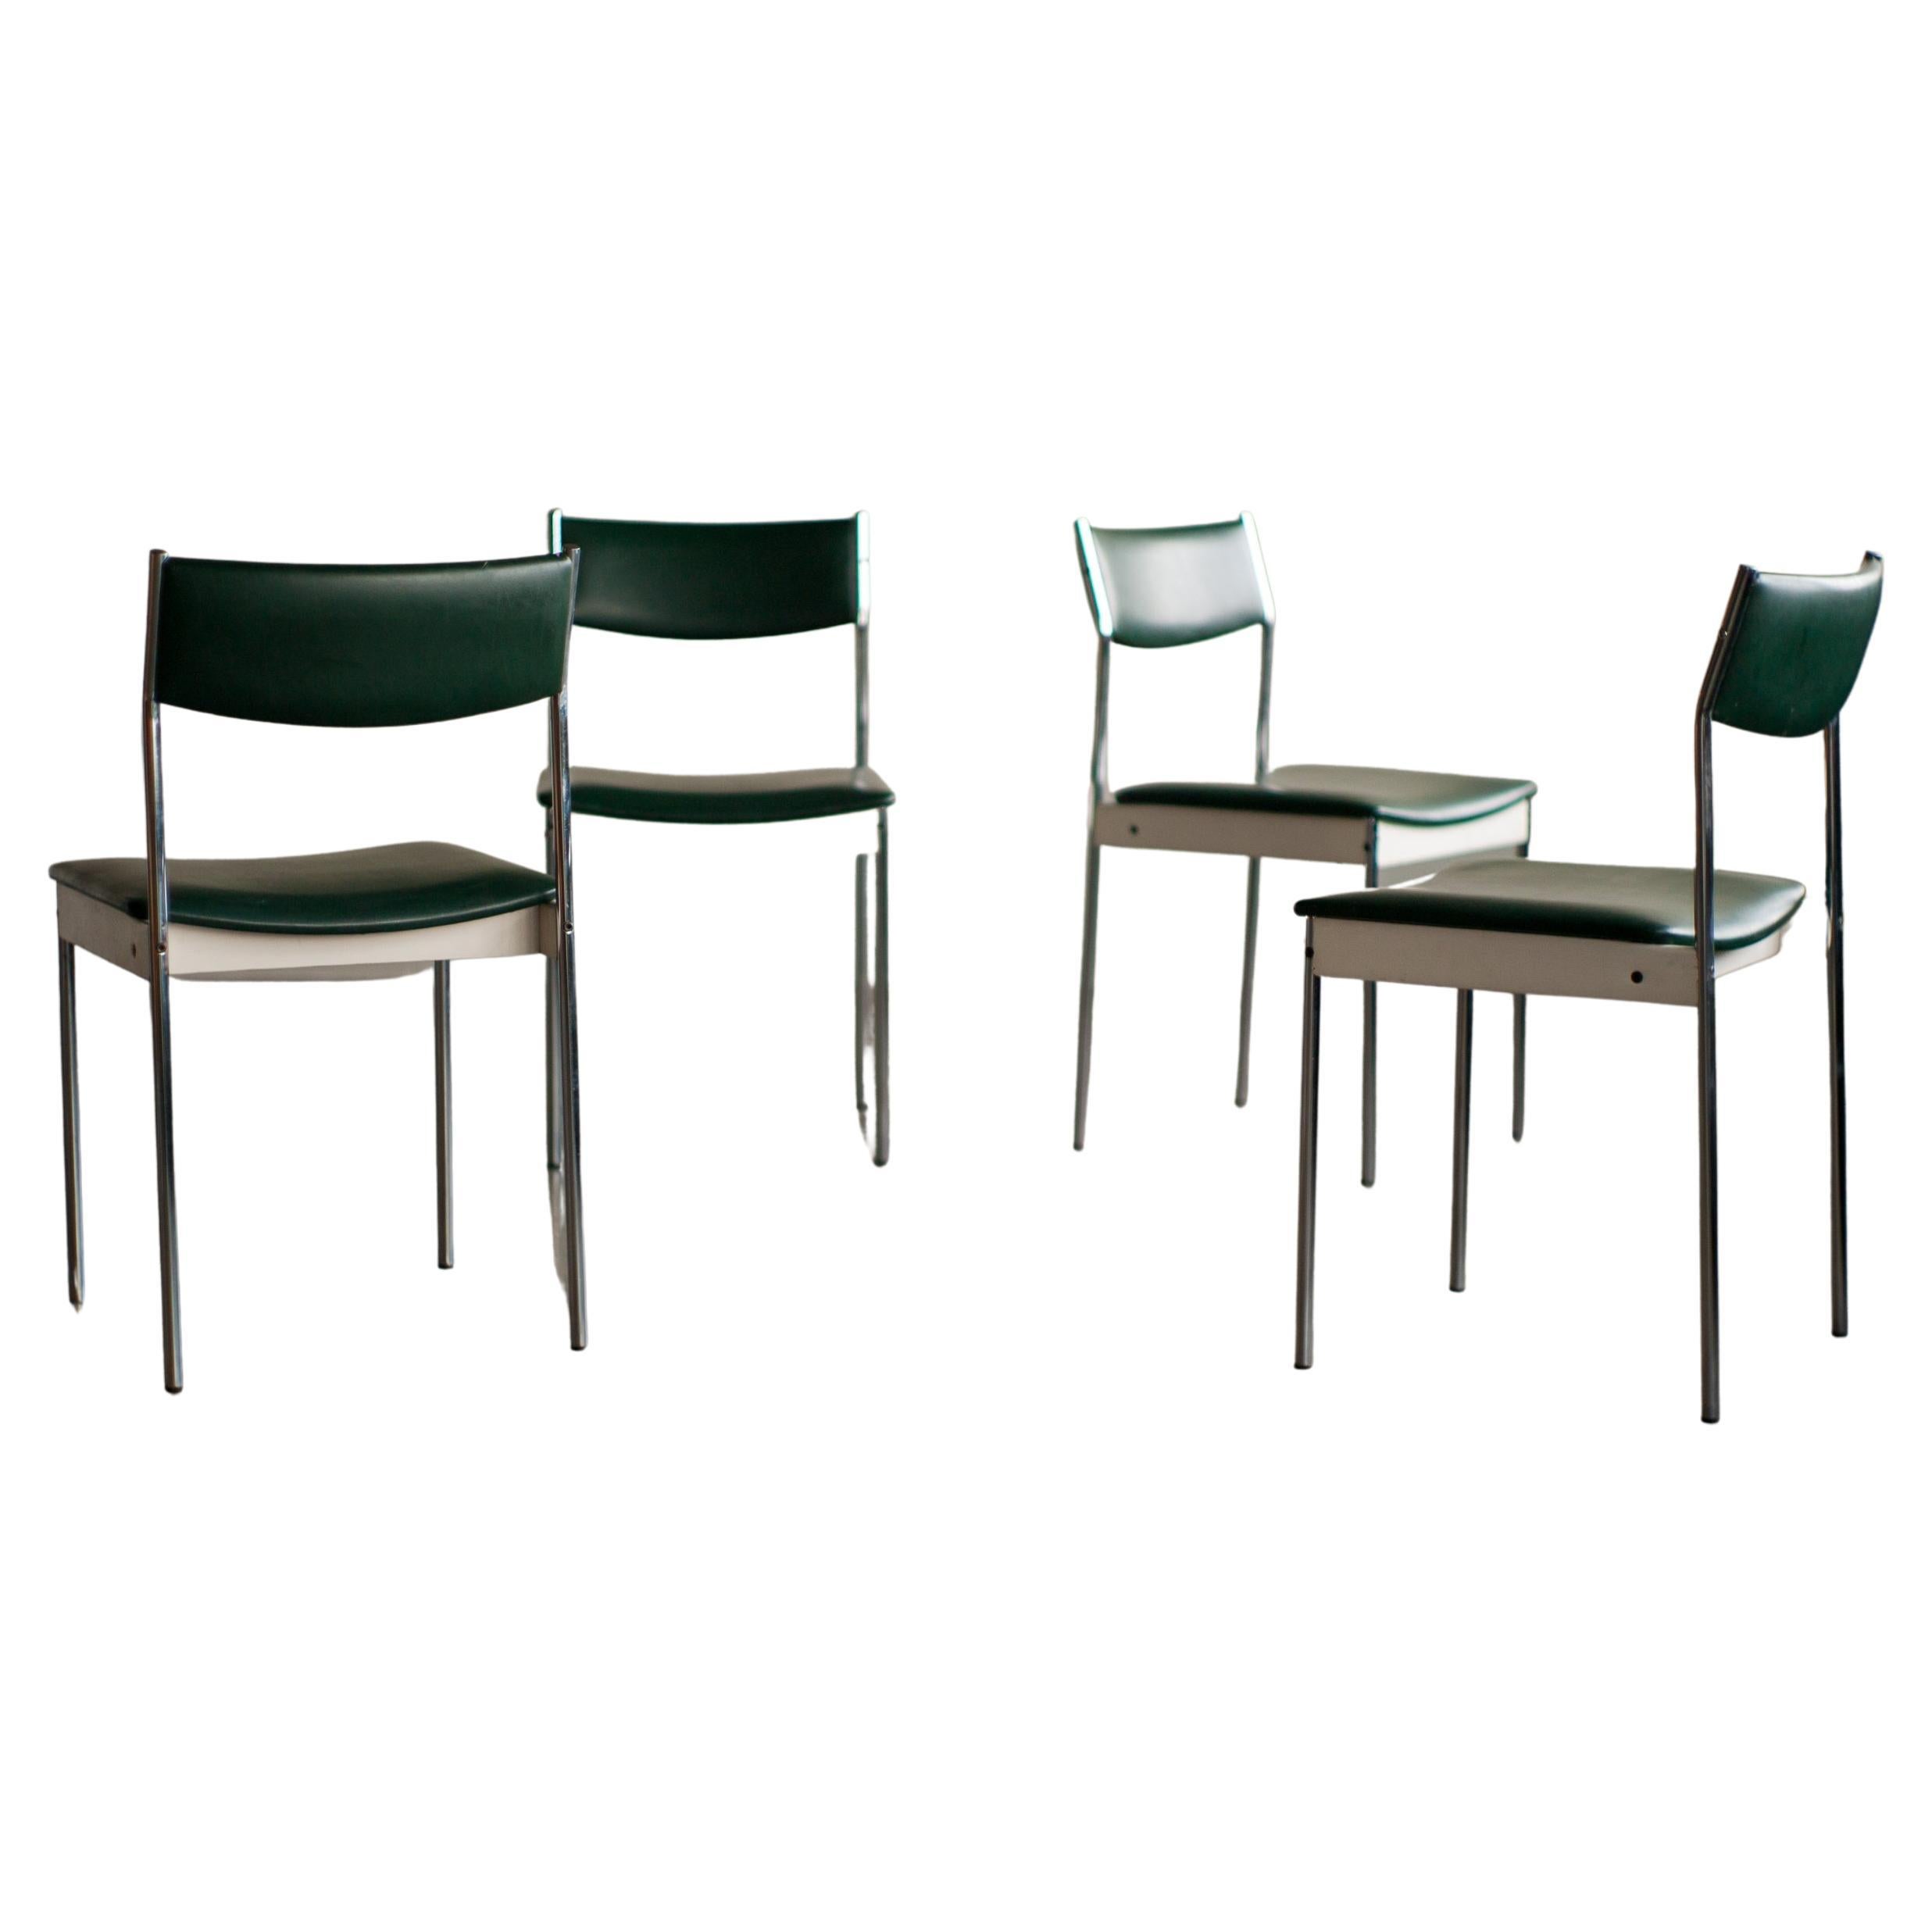 Four Dutch Design Dining Chairs